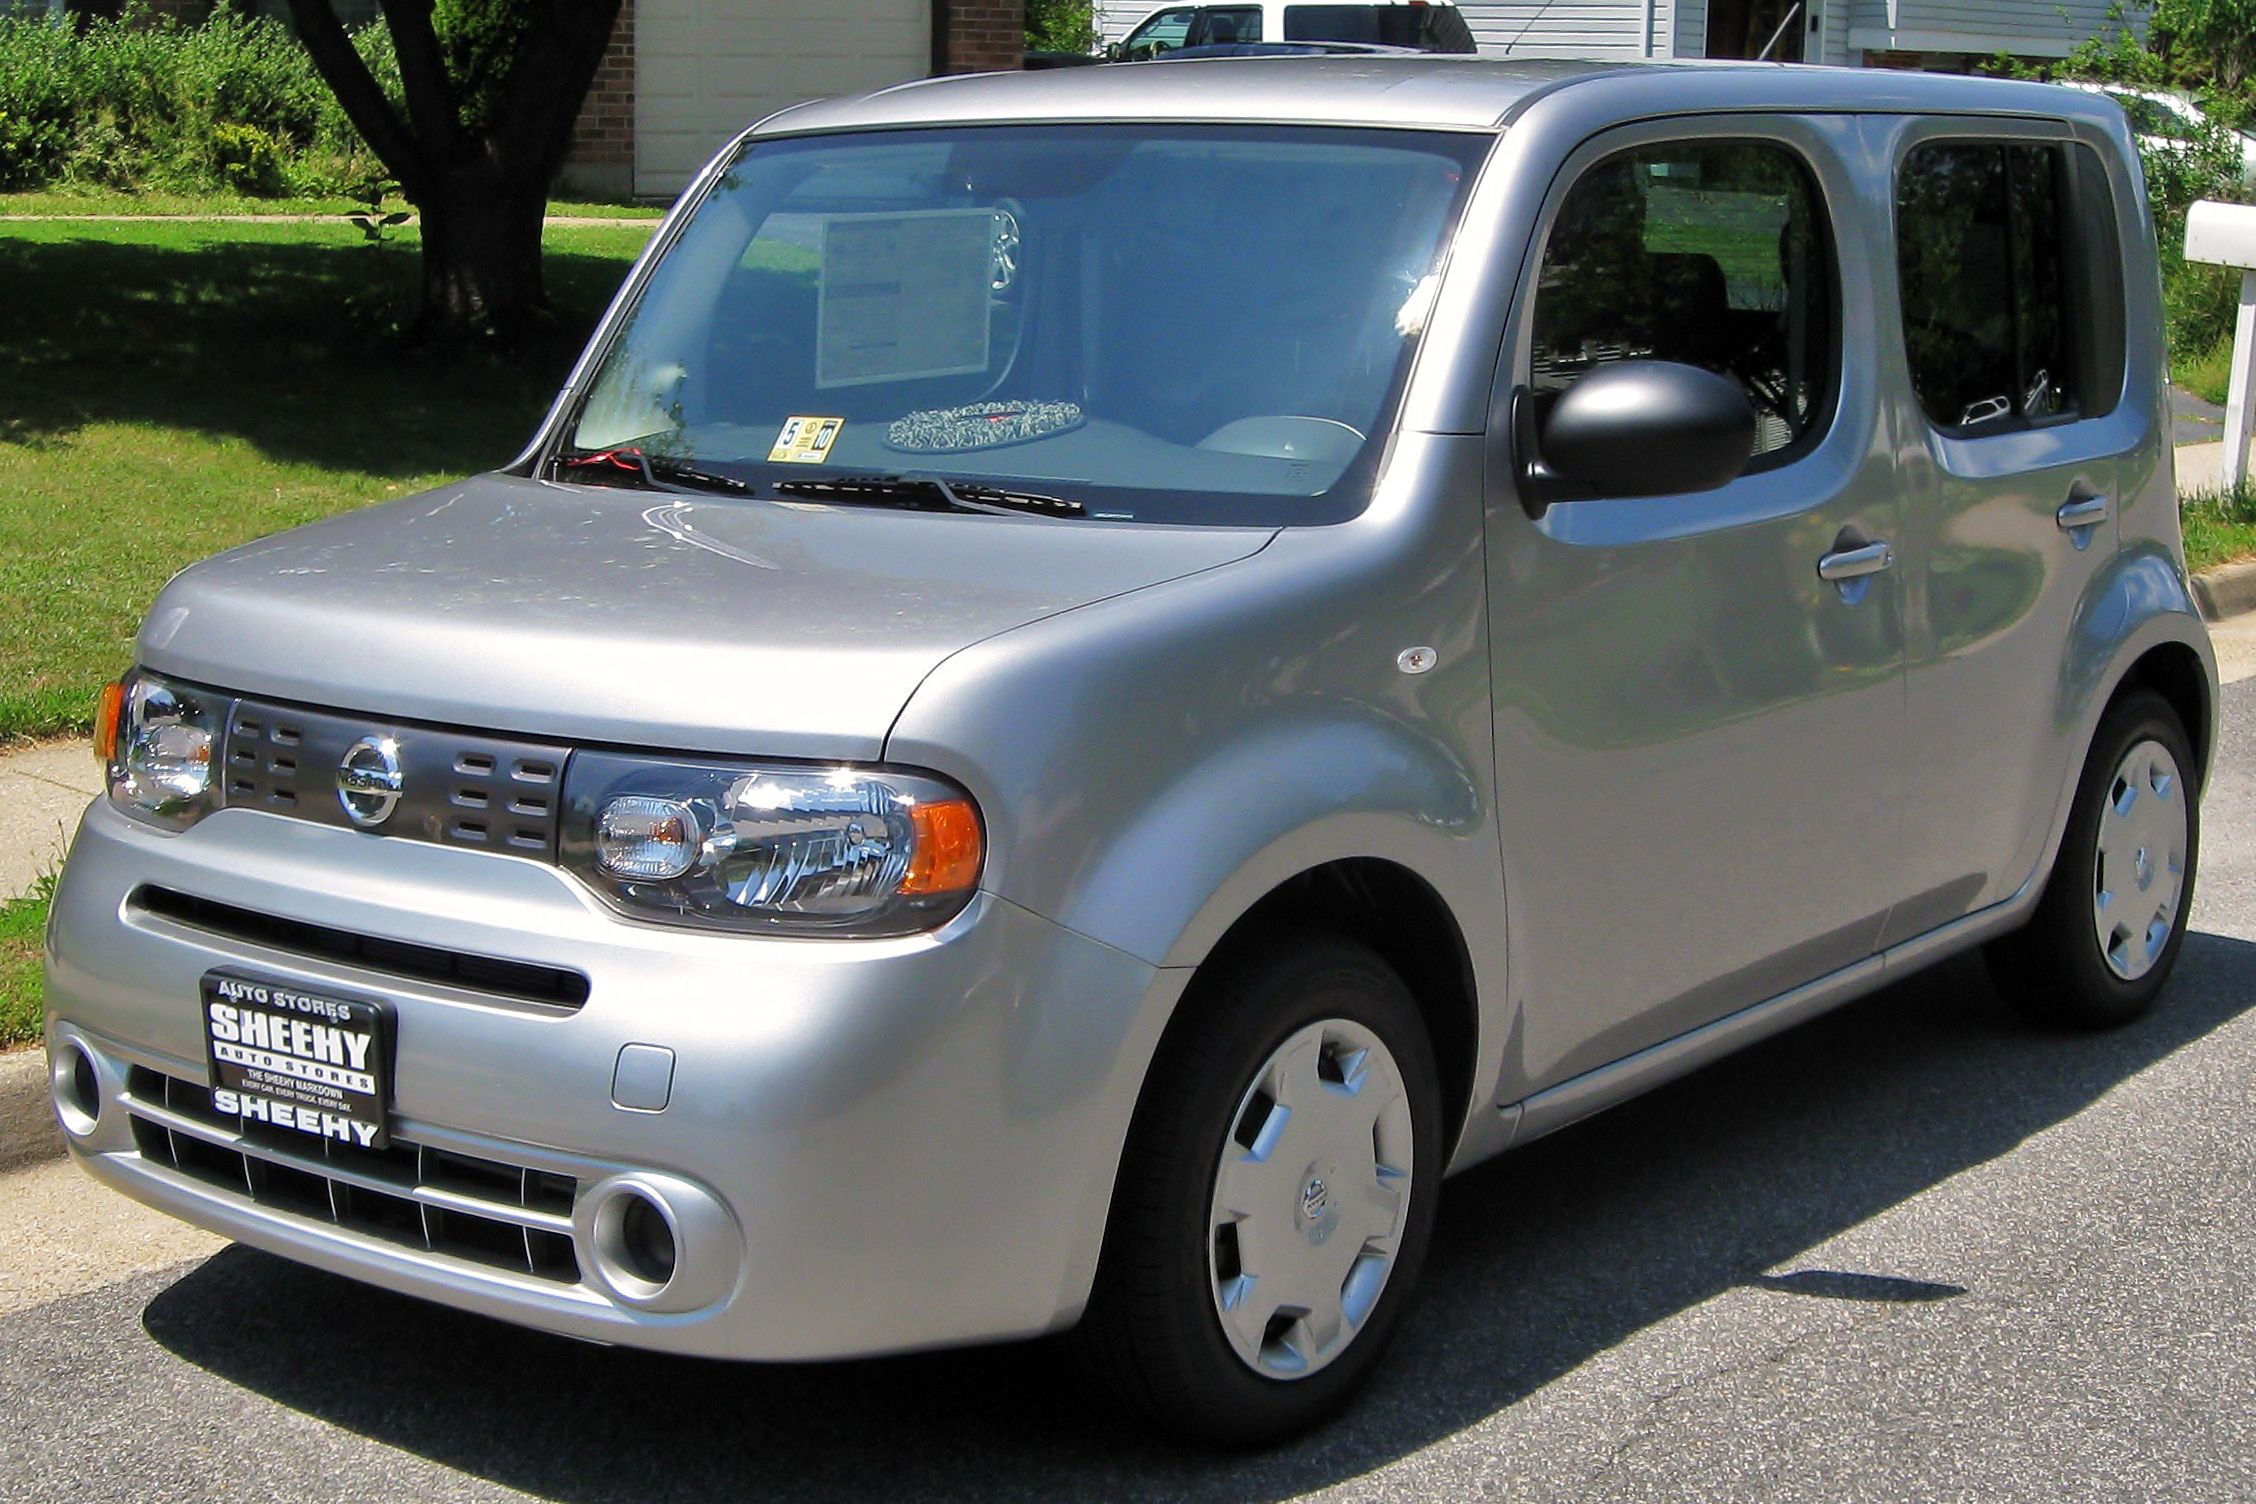 <p>Nissan always wanted its angular Cube crossover to stand out, but it ended up getting looks for all the wrong reasons. The Los Angeles Times called it an "<a href="http://www.latimes.com/la-fi-neil6-2009mar06-story.html">air-hating box of ugly</a> ... a travesty, a mockery, a baleful parody of auto aerodynamics." Nissan even admitted that the design was built on the idea of a "bulldog in sunglasses" — but, as the Times wonders: "Which end is wearing the sunglasses?"</p>